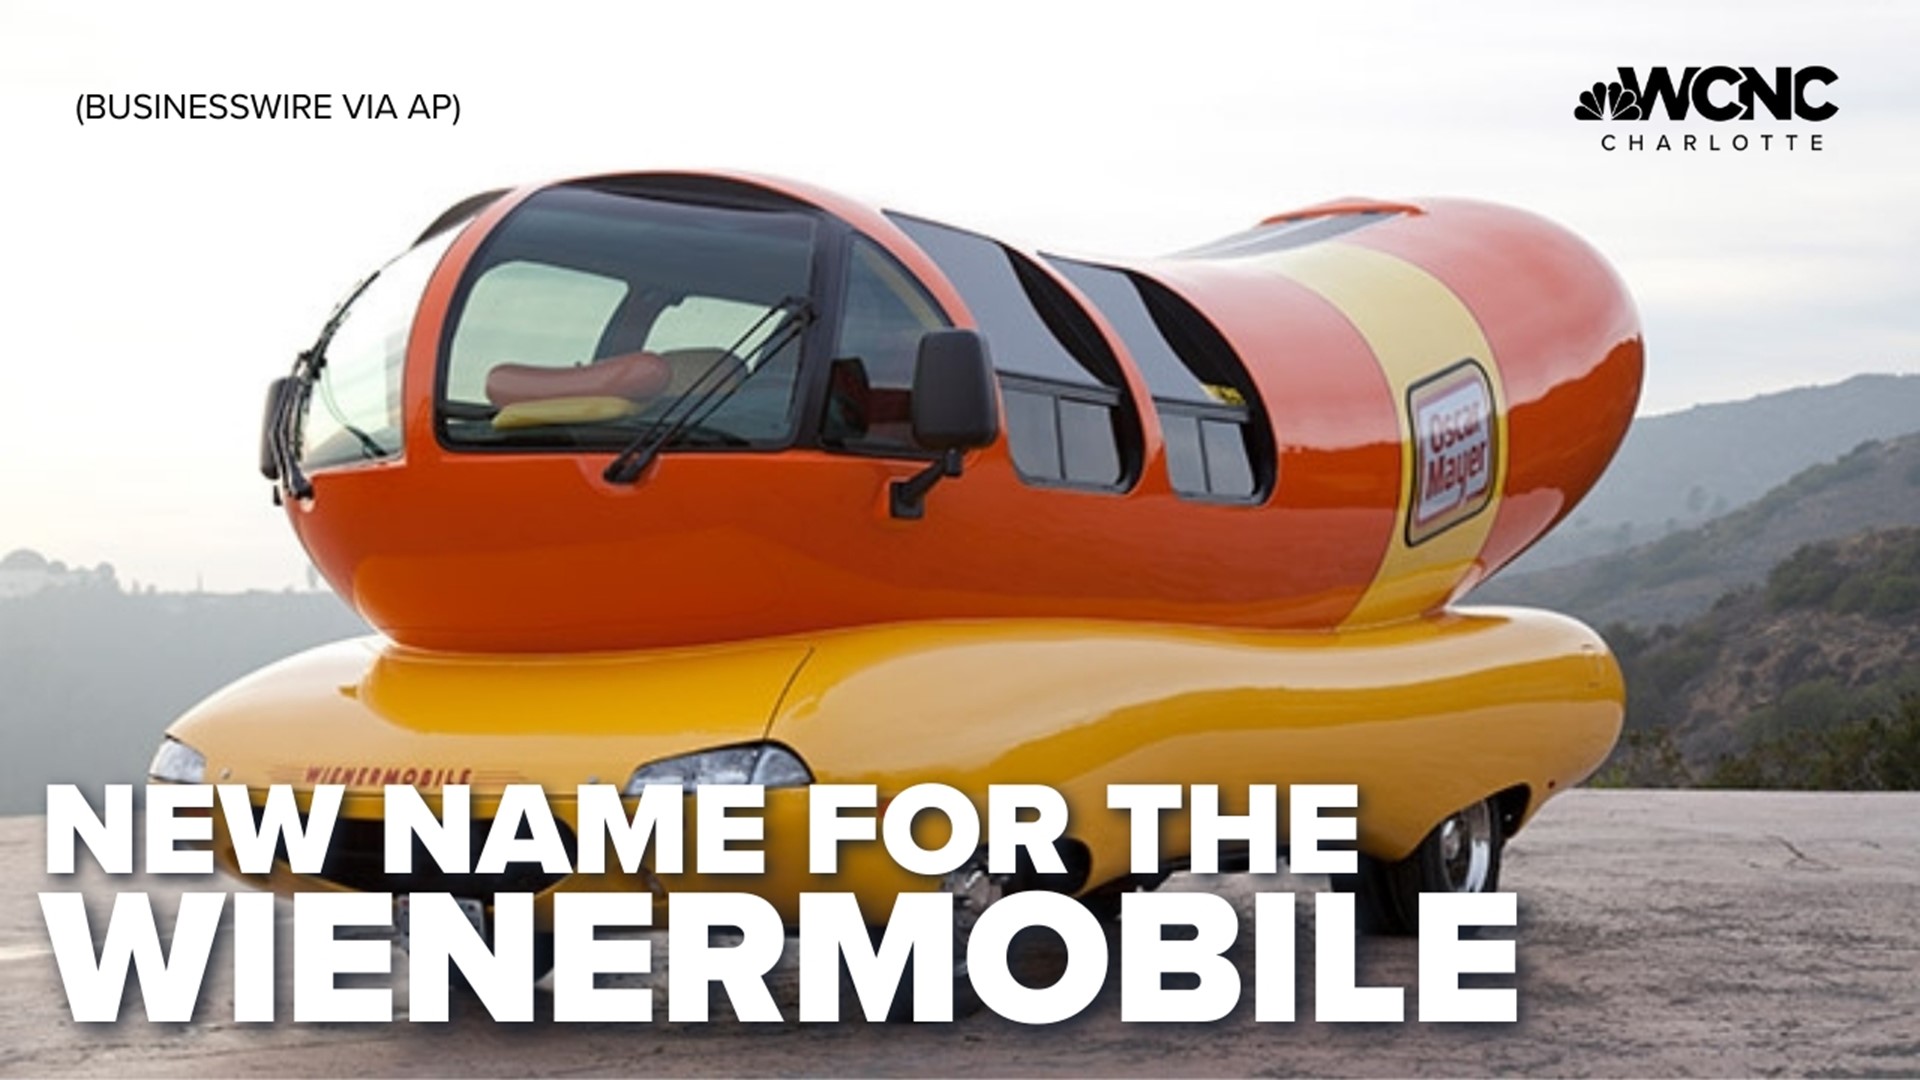 It'll be getting a new name: the Frankmobile!